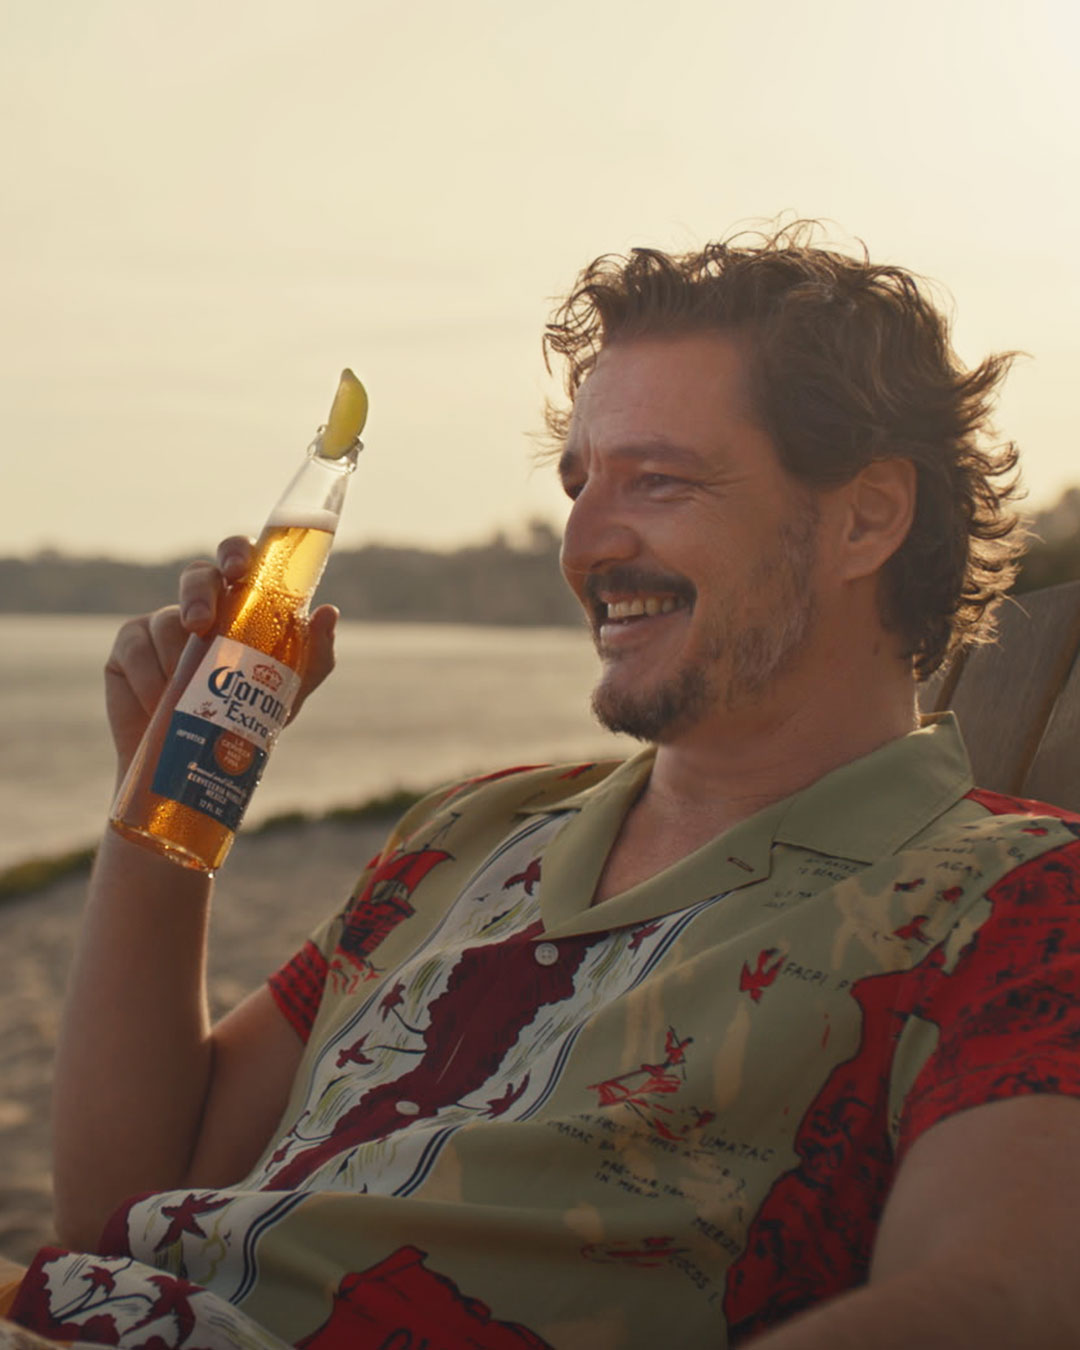 The iconic Mexican beer celebrates its Latino roots with a comprehensive bicultural campaign